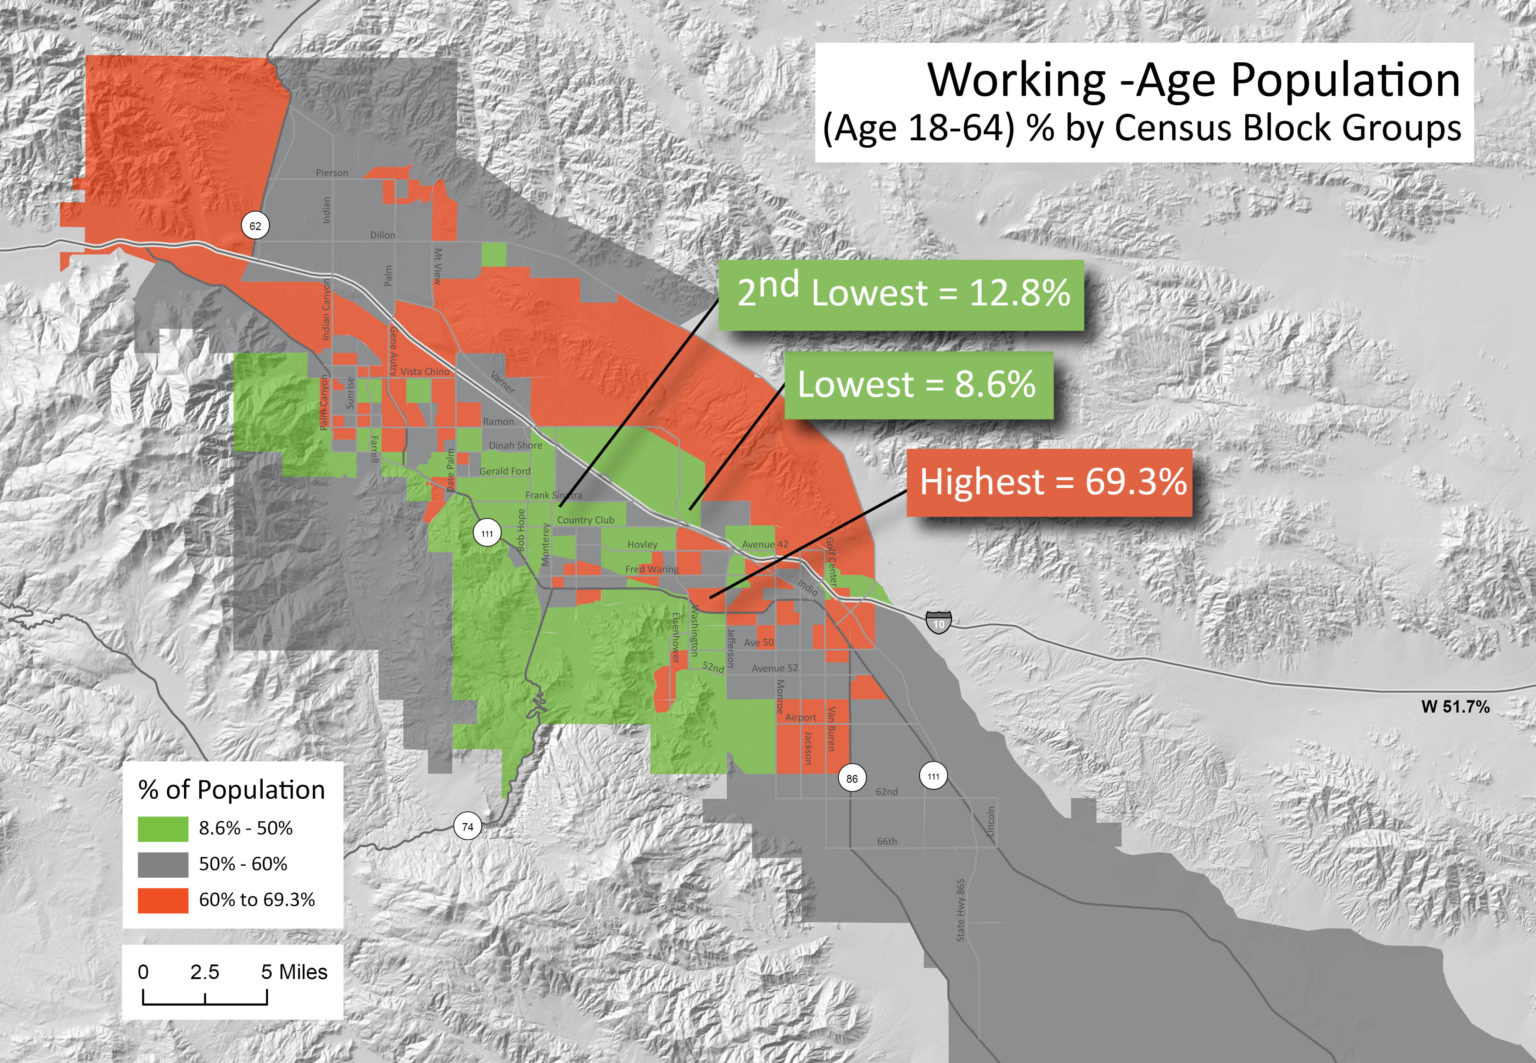 The Working Age Population of the Coachella Valley CVEP